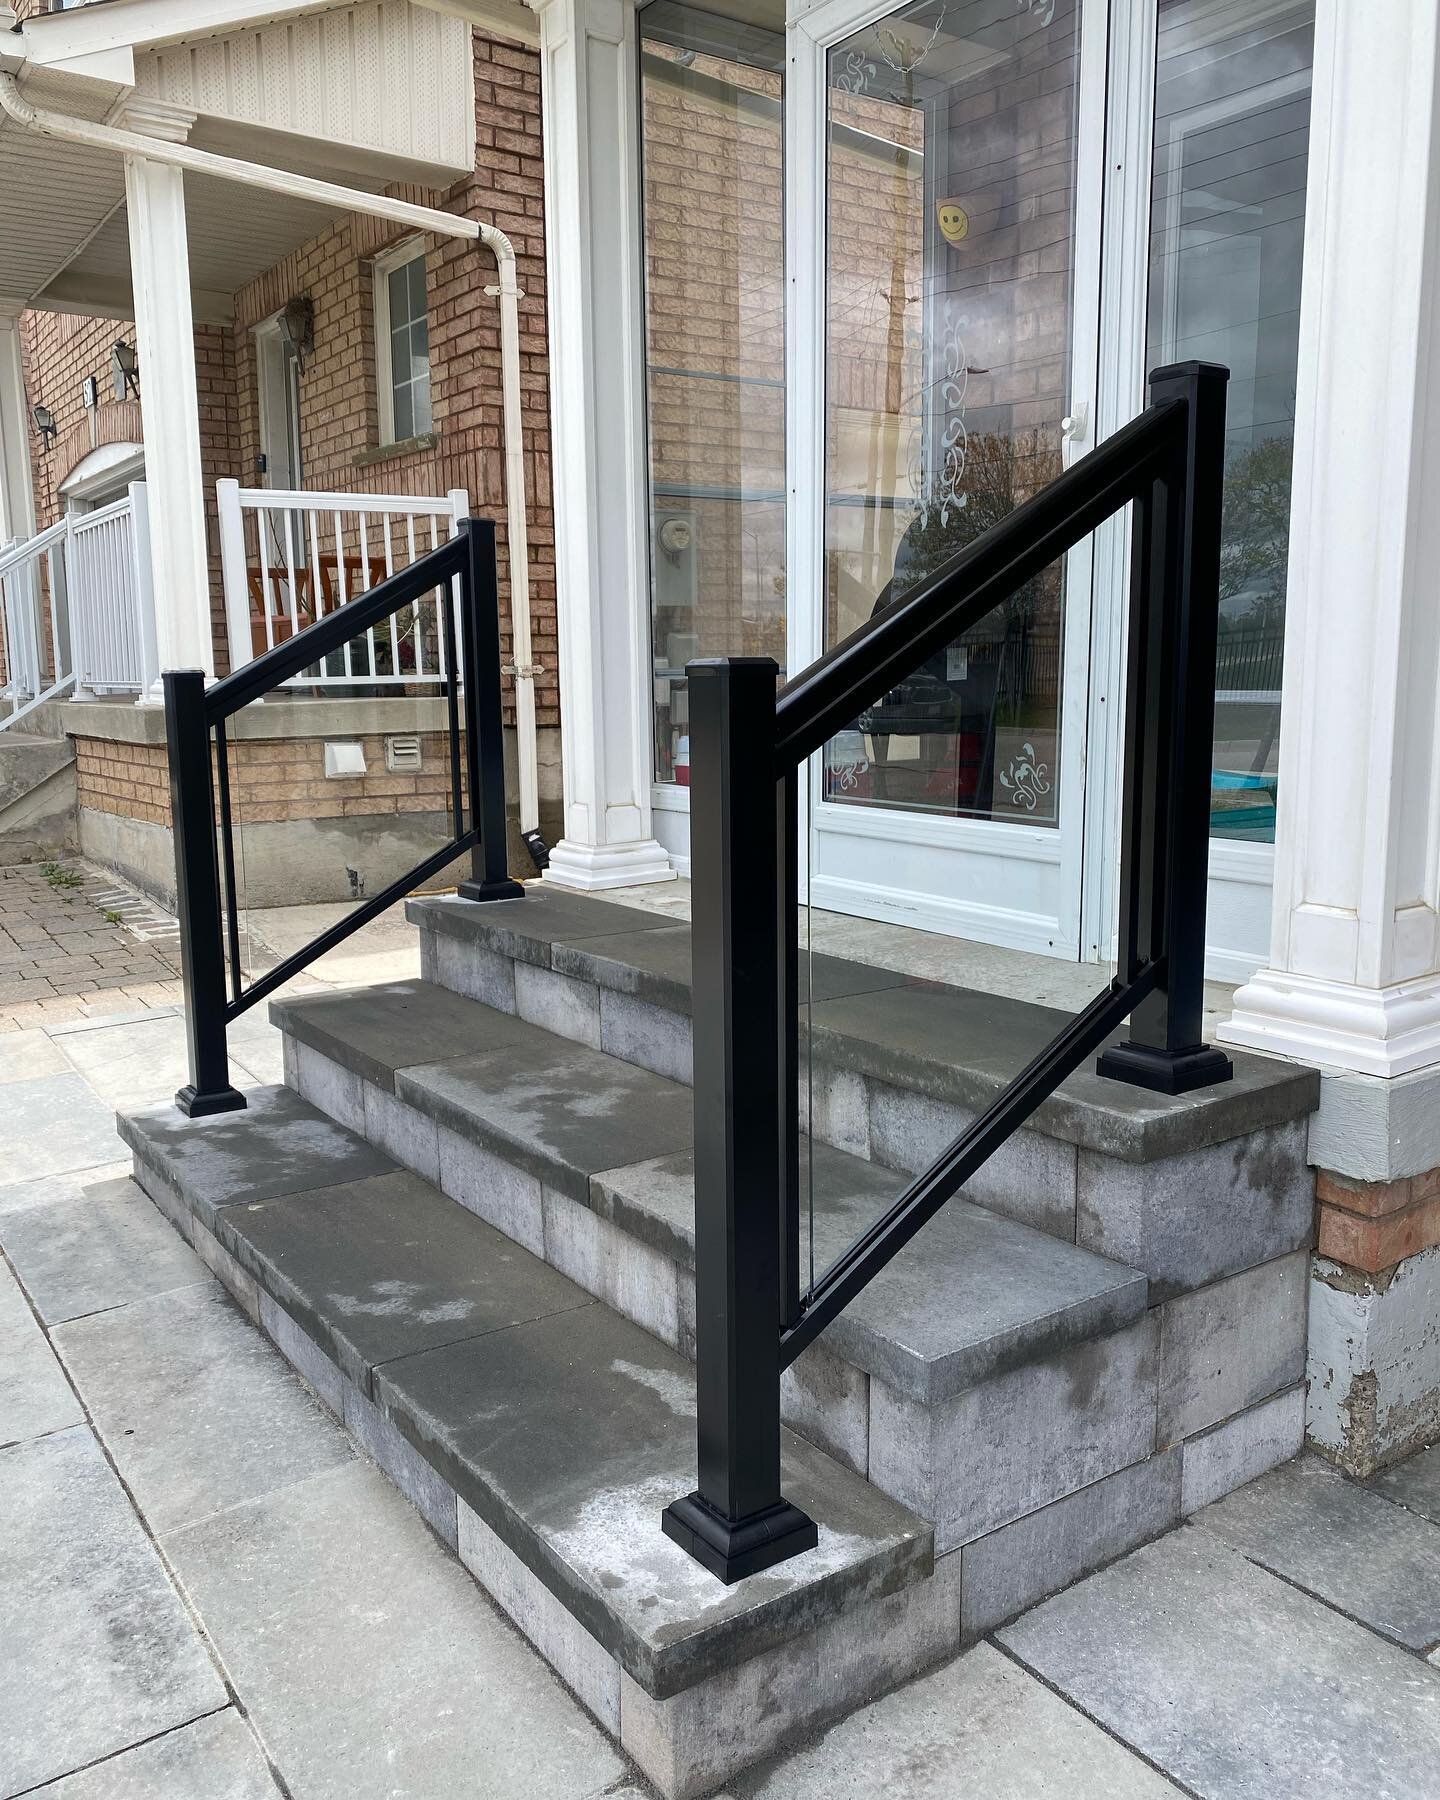 Clean Work ☑️ 
Black Aluminum With Clear 6mm glass 🏋🏻&zwj;♂️
&bull;
&bull;
&bull;
&bull;
#railing #aluminumrailing #gta #yorkregion #contractor #building #backyarddesign #glassrailing #renovation #landscaping #diy